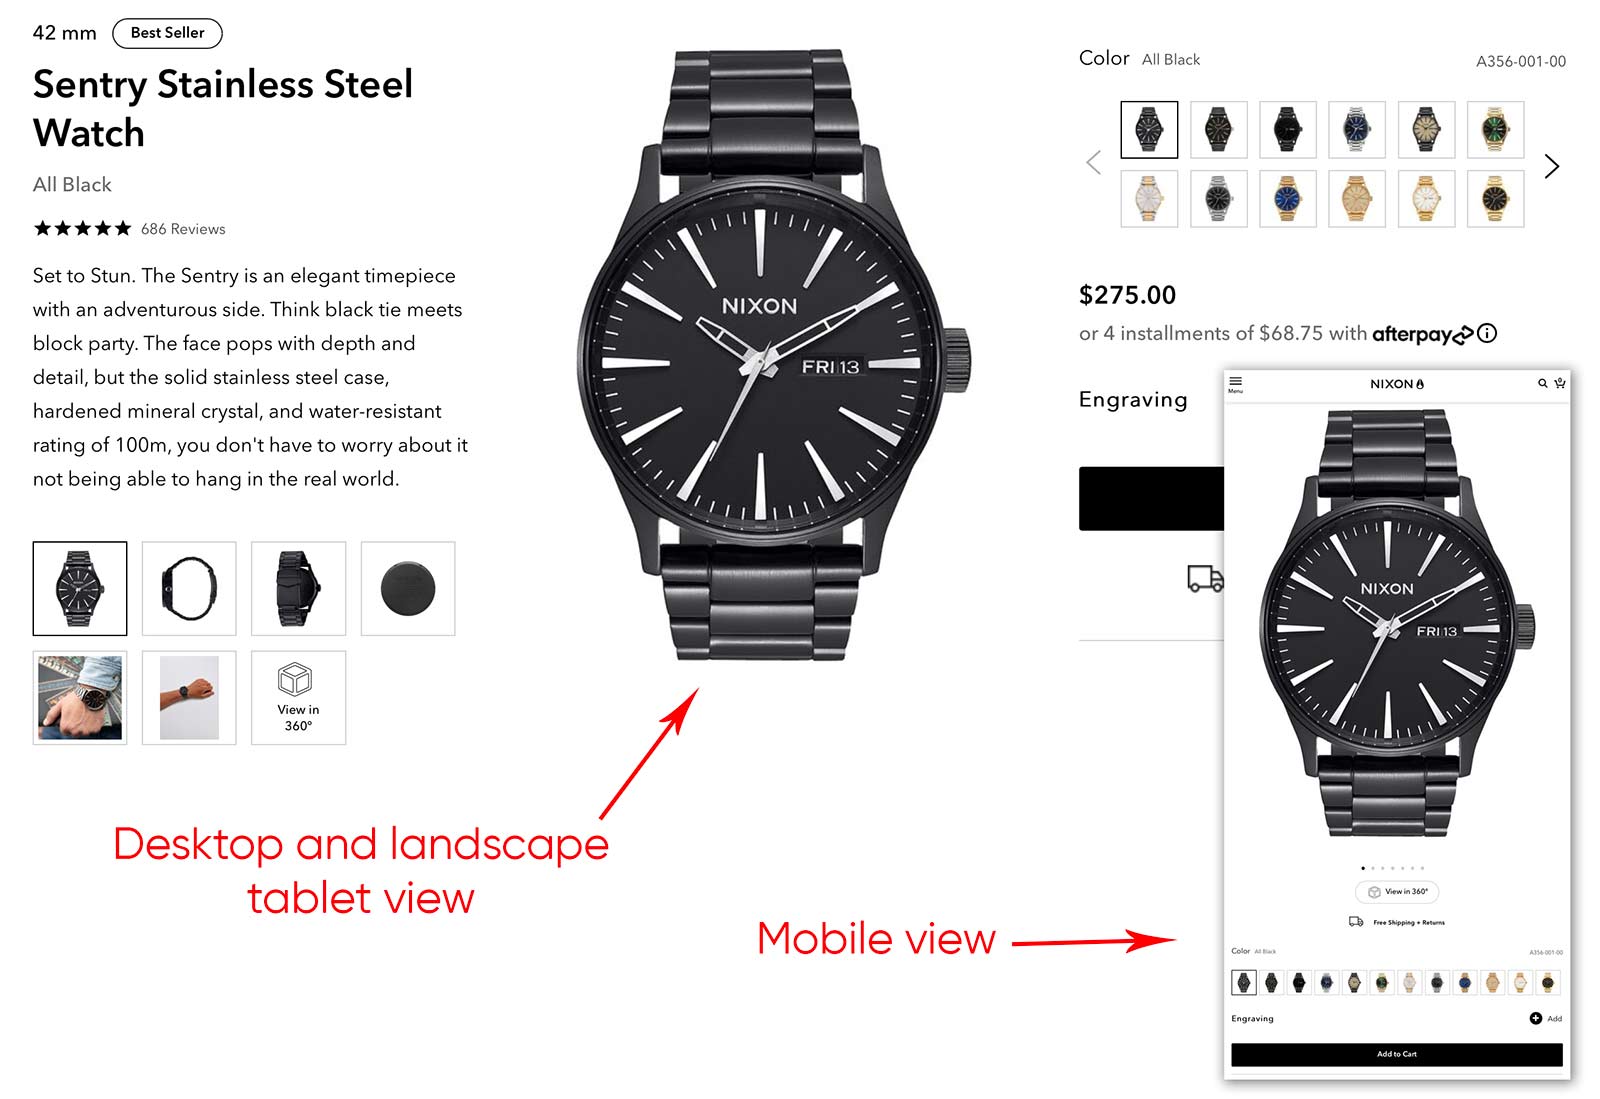 Nixon watch product page, featuring a large image of a stylish watch